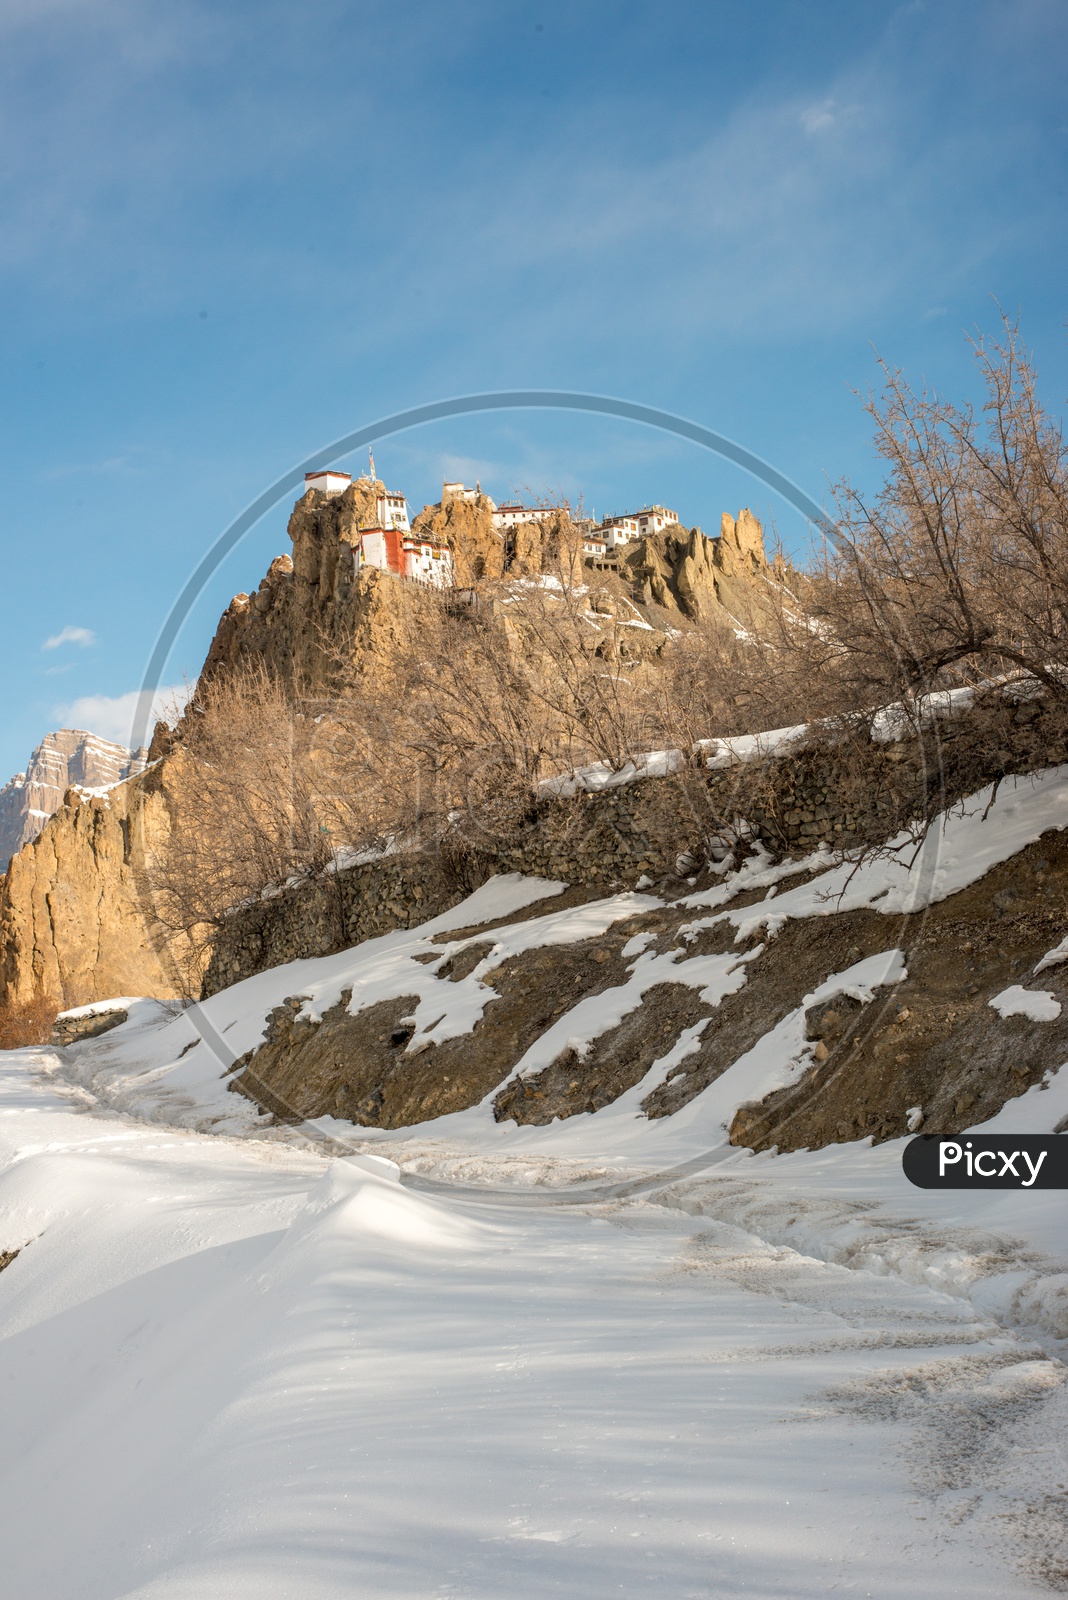 Dhankar Monastery Surrounded by Snow in Winter Season